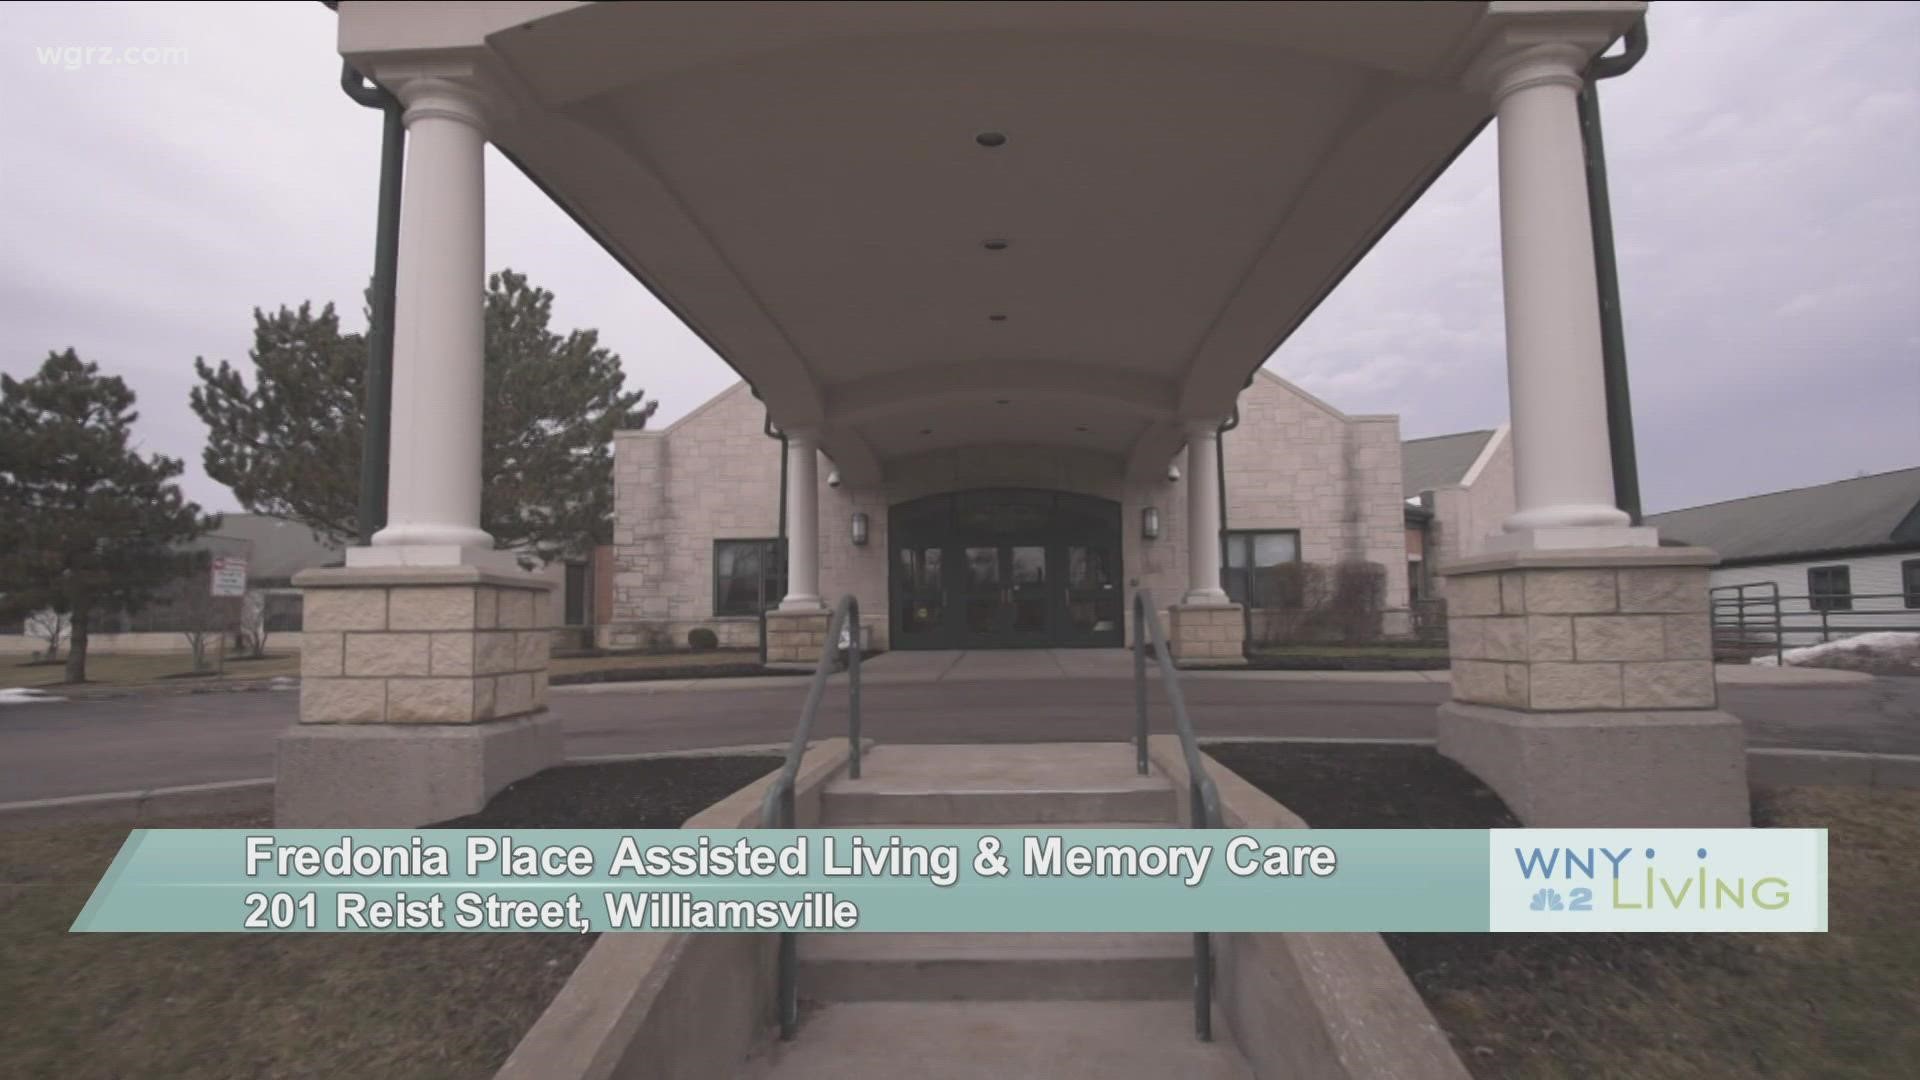 WNY Living - January 29 - Fredonia Place Assisted Living & Memory Care (THIS VIDEO IS SPONSORED BY FREDONIA PLACE ASSISTED LIVING & MEMORY CARE)